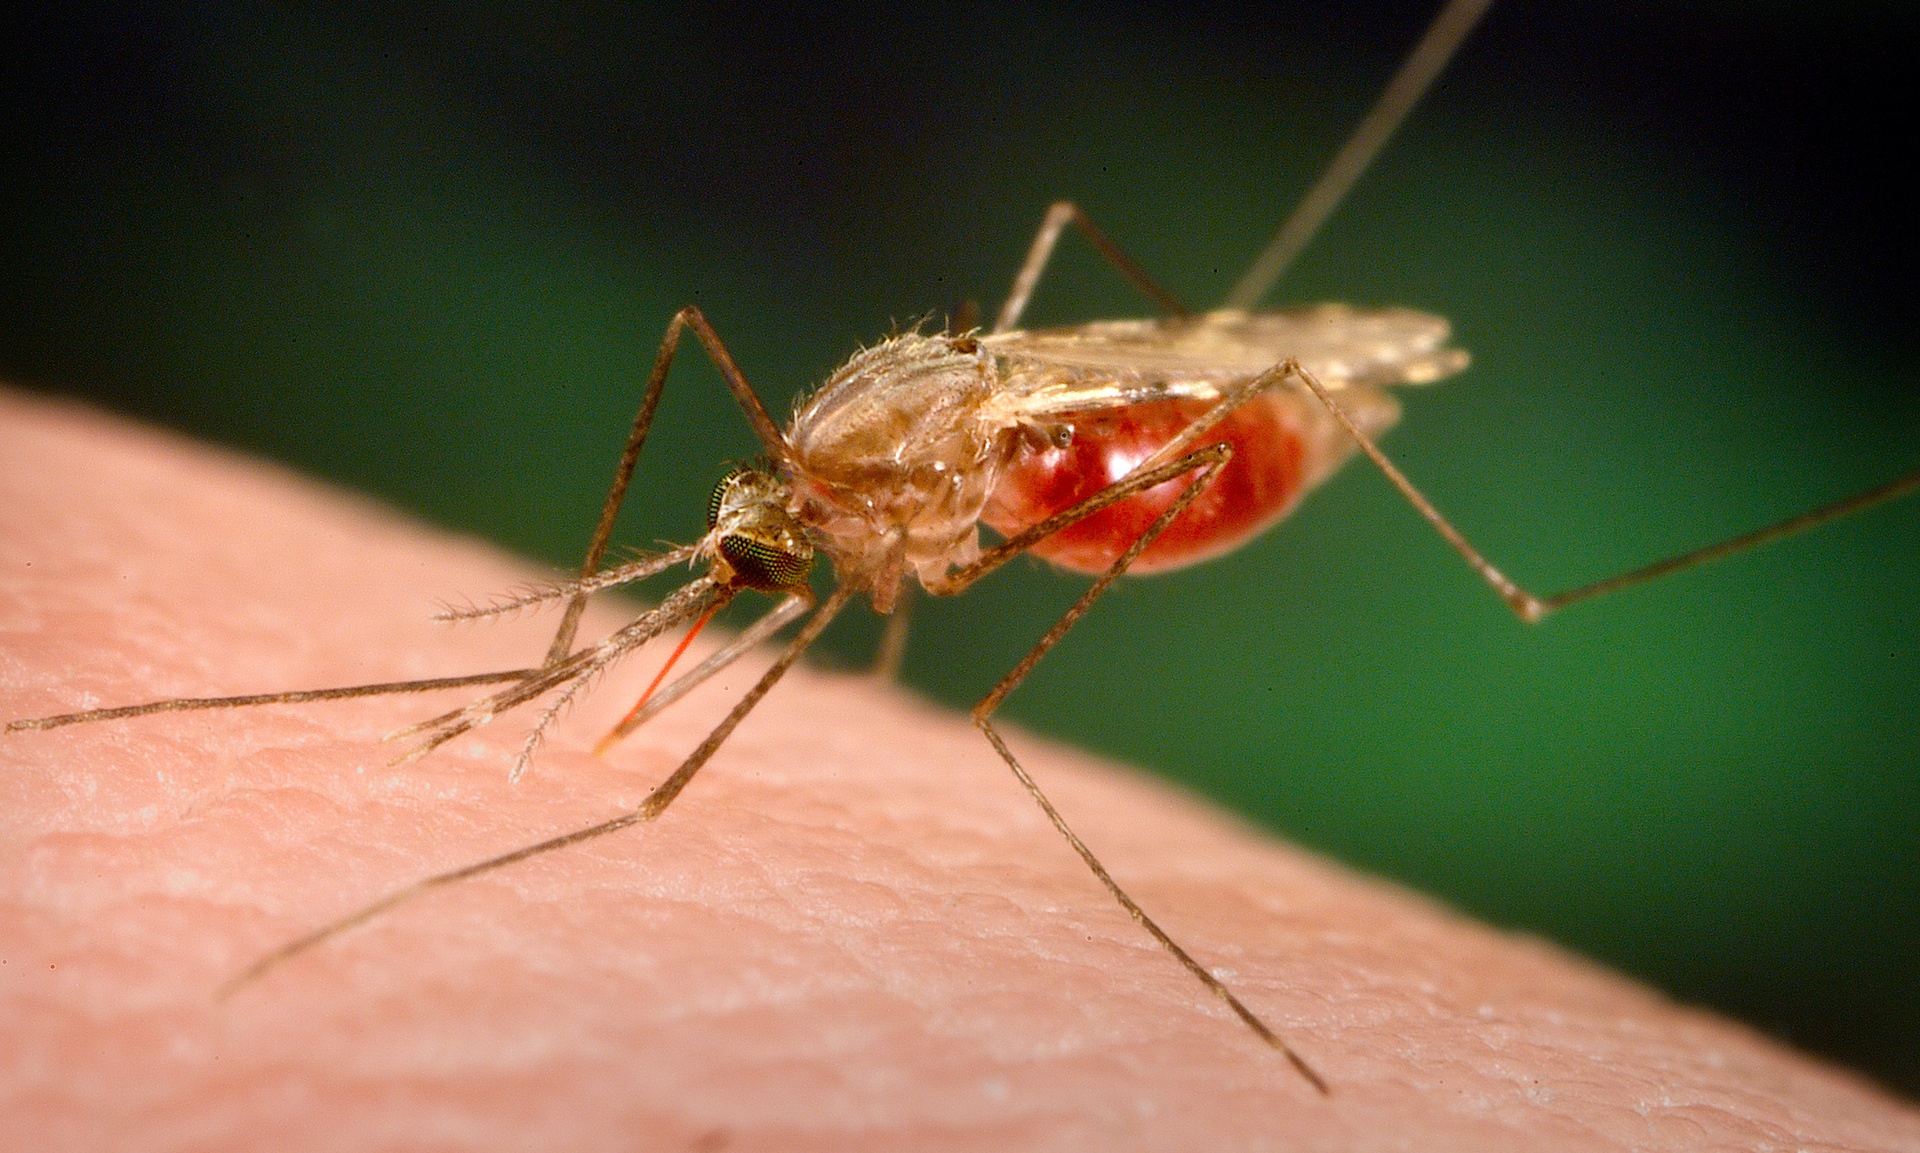 Malaria parasite Plasmodium is transmitted via the bites of infected mosquitoes. Photo: AP